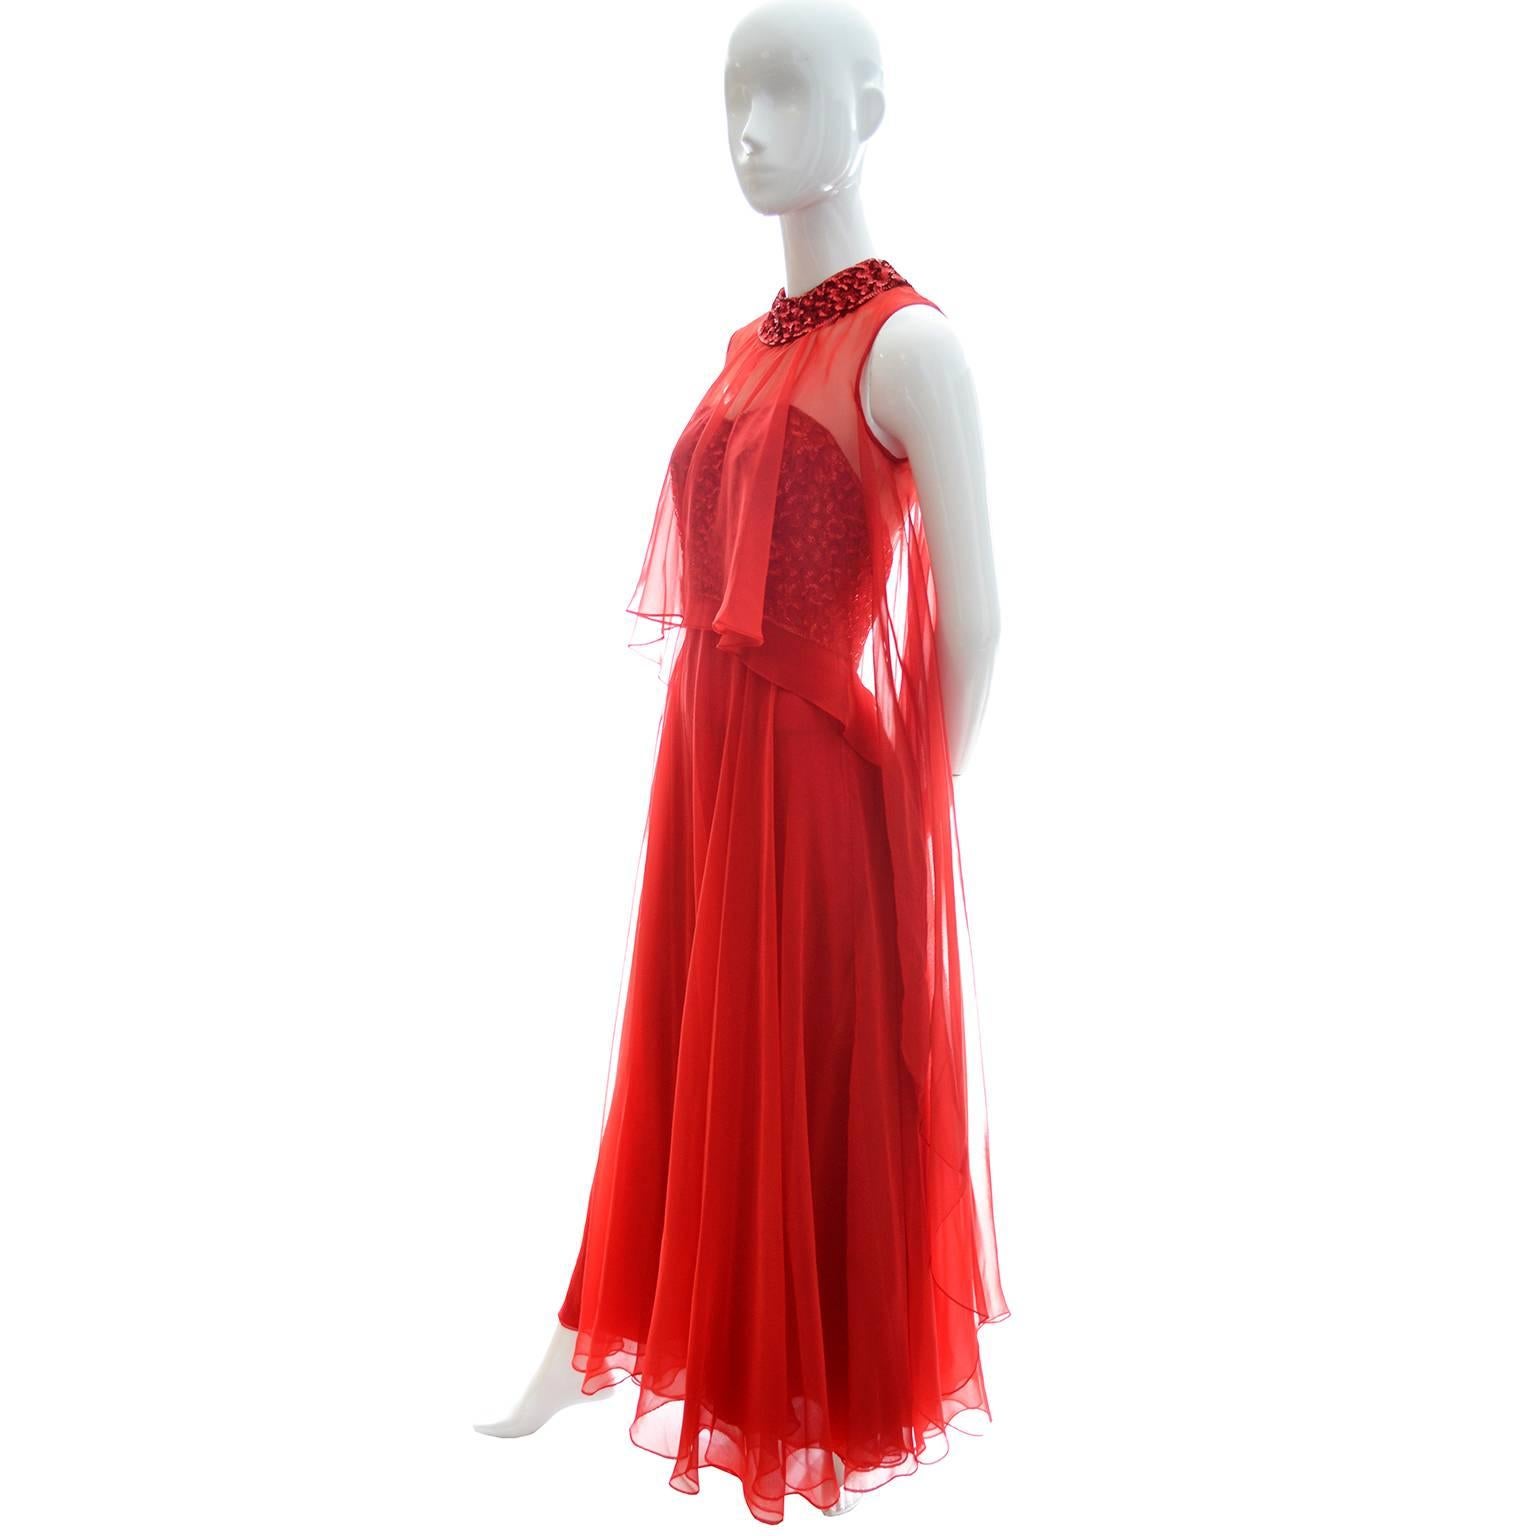 This dramatic vintage sleeveless 70's full length dress has a red sequin covered bodice and a full, flowing chiffon skirt. The bodice has an overlay of sheer red chiffon and a sequin covered collar. This ethereal dress has a back zipper and I would